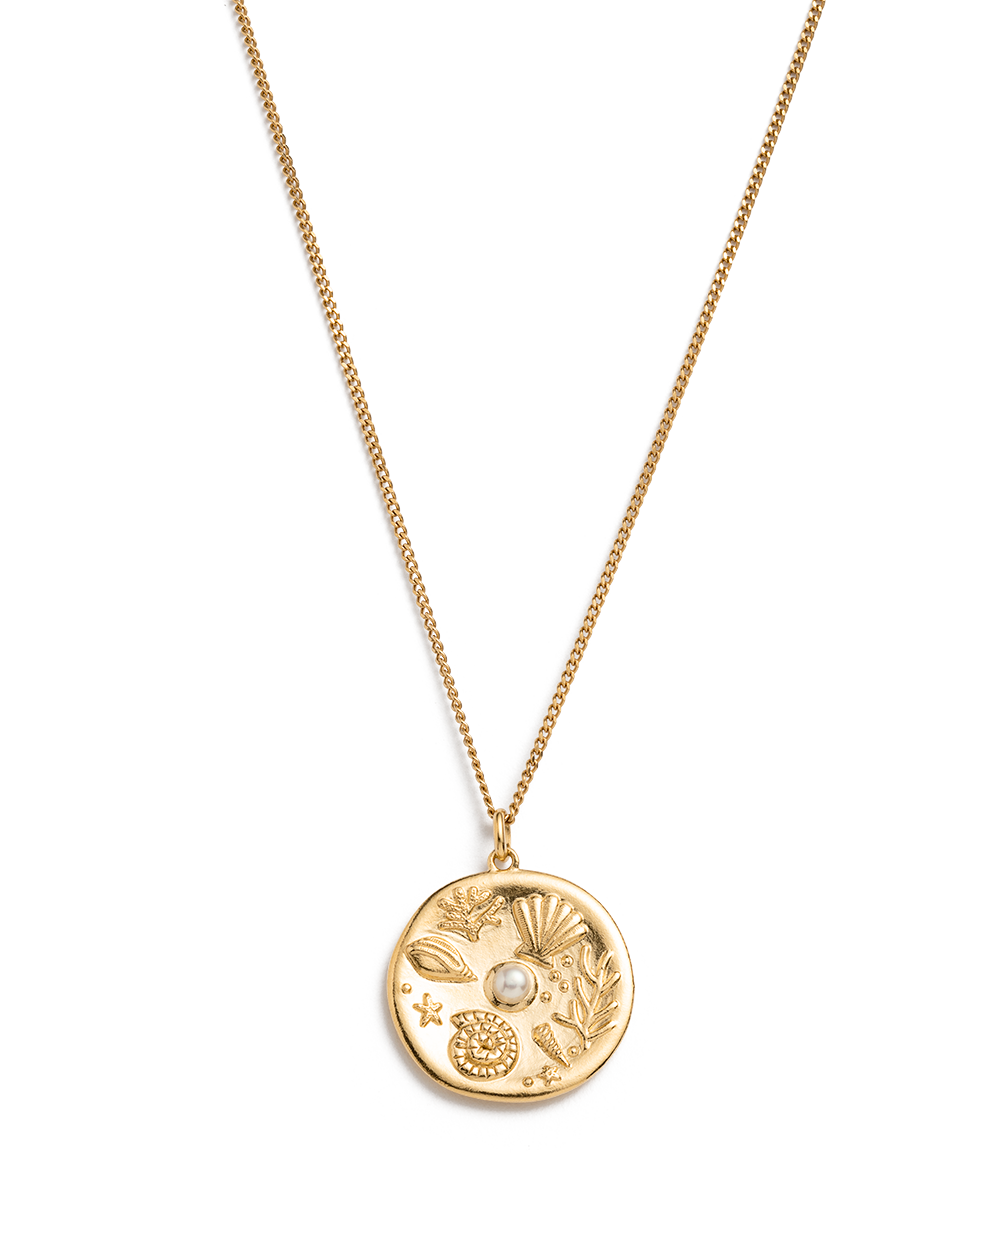 BY THE SEA COIN NECKLACE (18K GOLD VERMEIL) - IMAGE 1